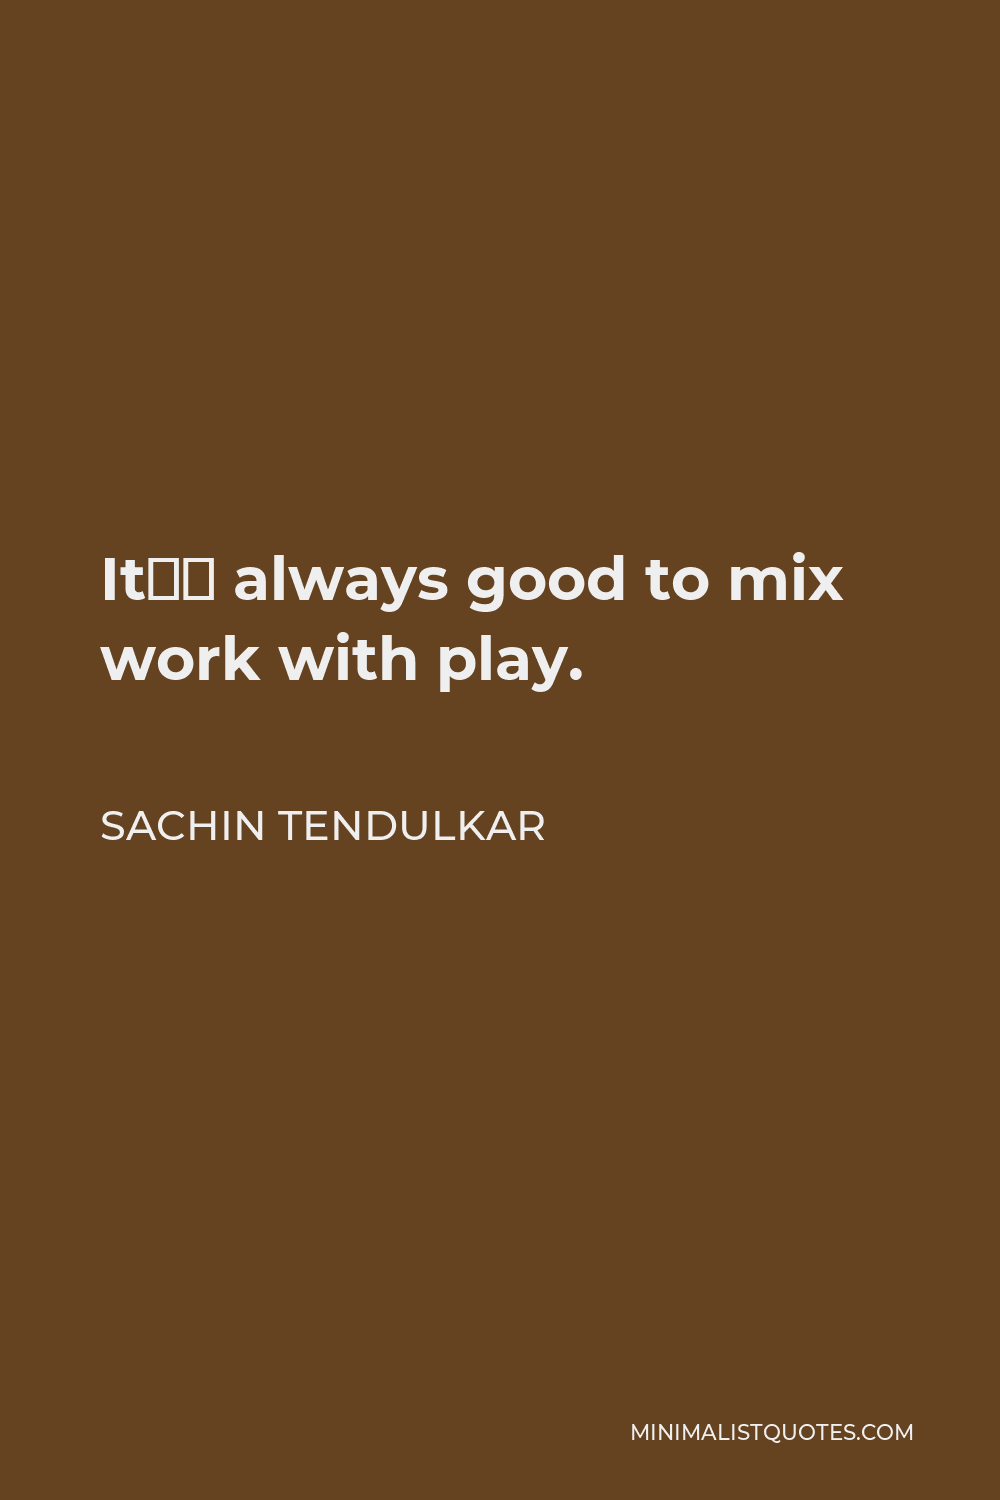 Sachin Tendulkar Quote - It’s always good to mix work with play.